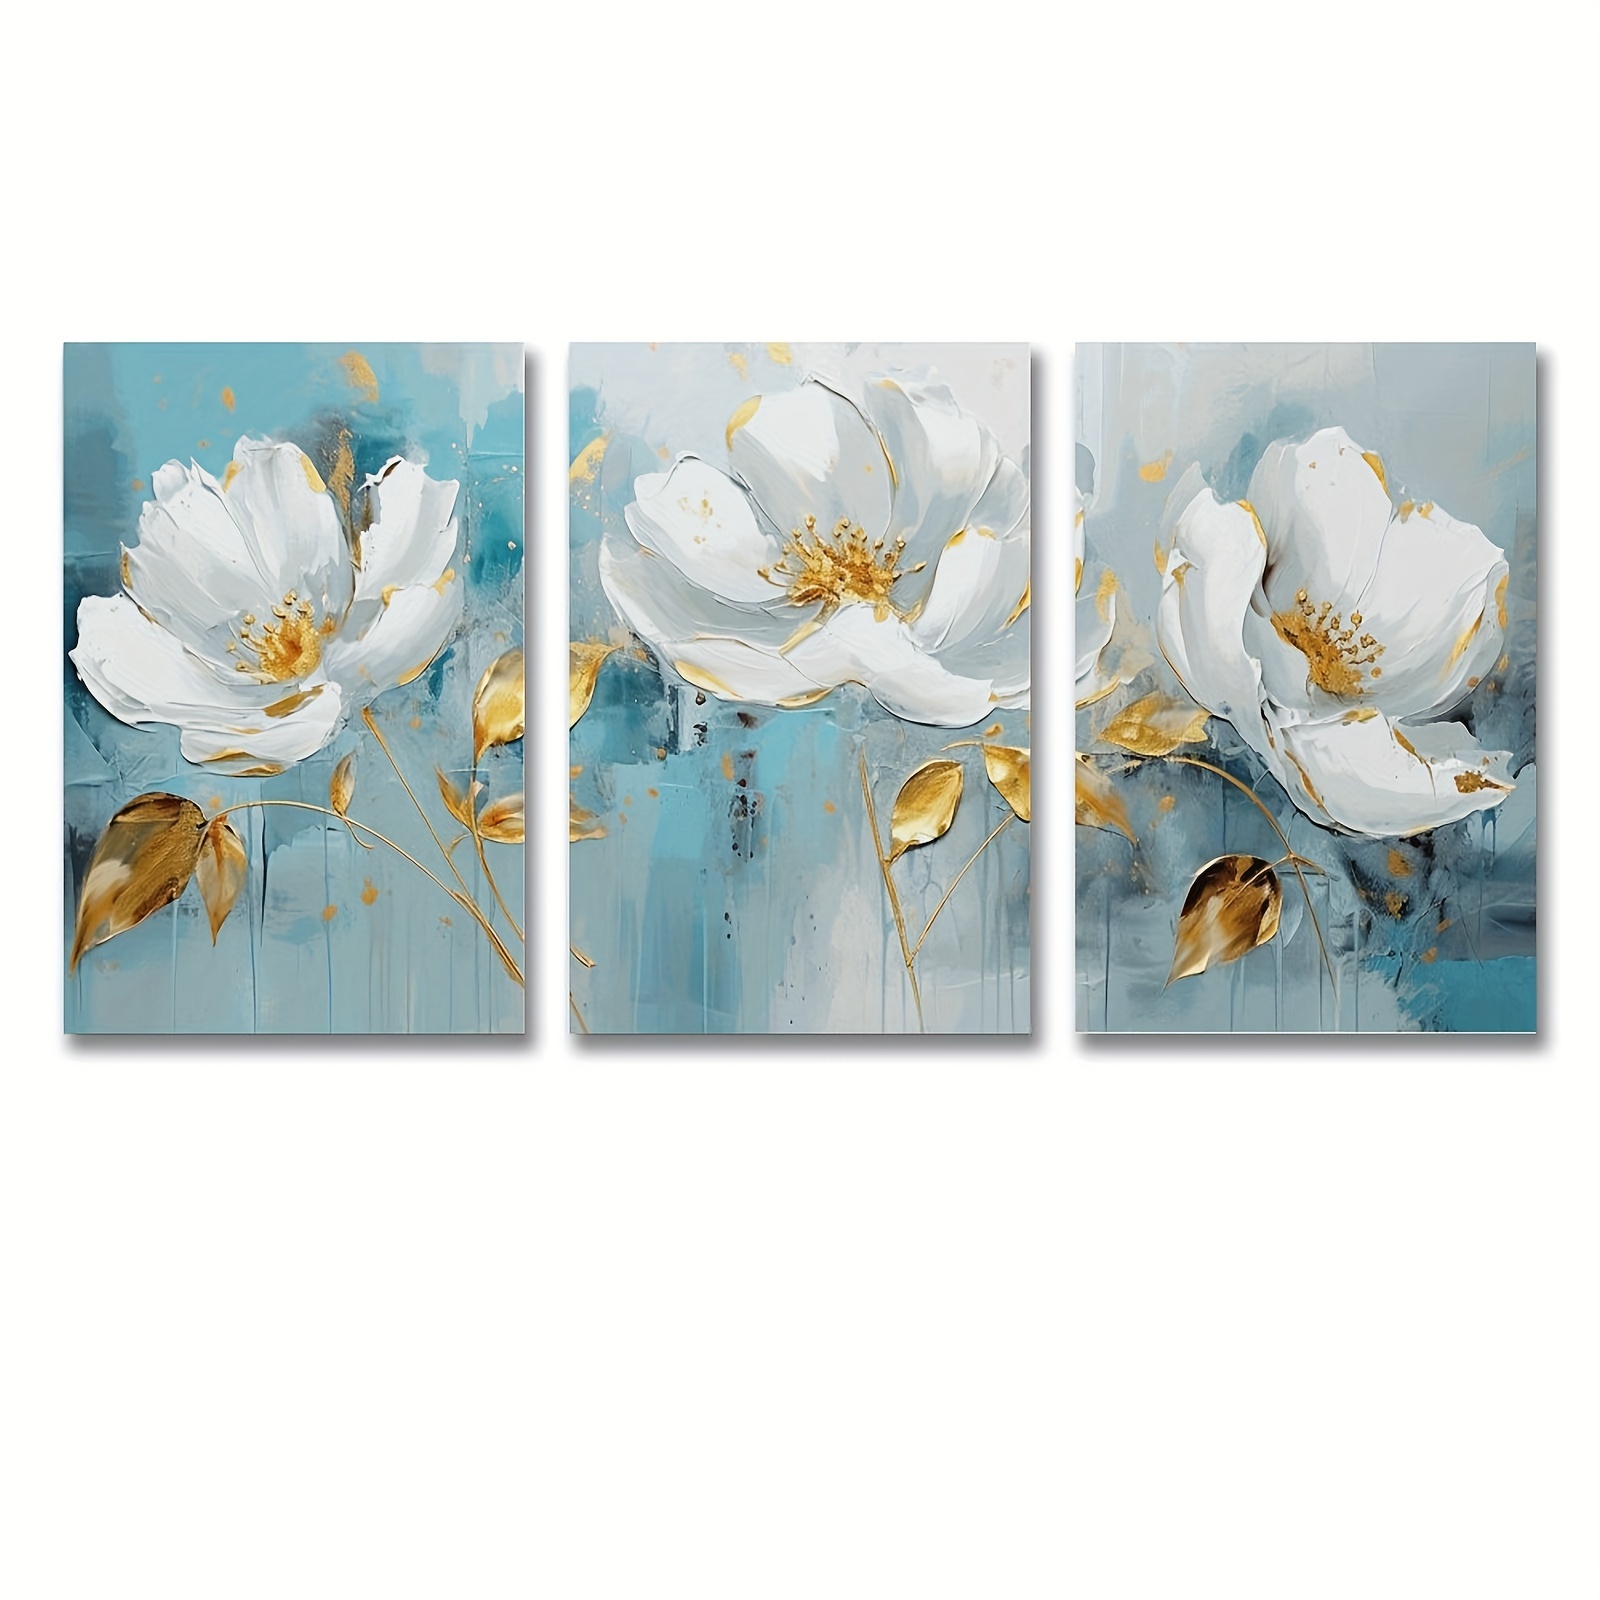  Canvas Wall Art for Living Room, Hello Spring Floral Framed  Wall Art Printed Modern Wall Painting for Bedroom Kitchen Office Decor  Ready to Hang 12x12 Colorful Flowers Rustic Paint Backdrop: Posters